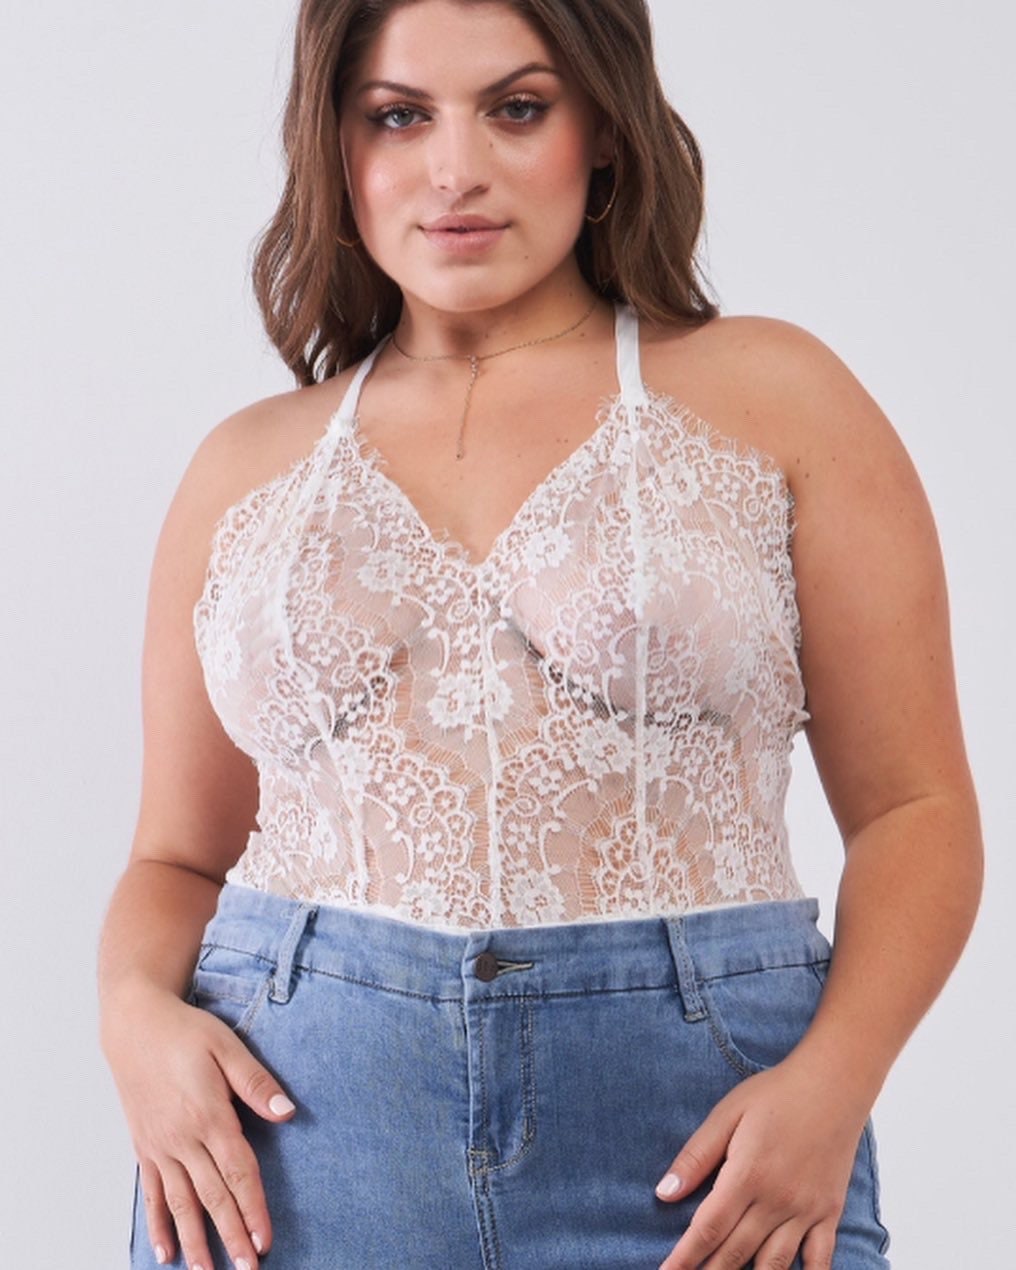 Buy Plus Size Lingerie Set Online In India -  India